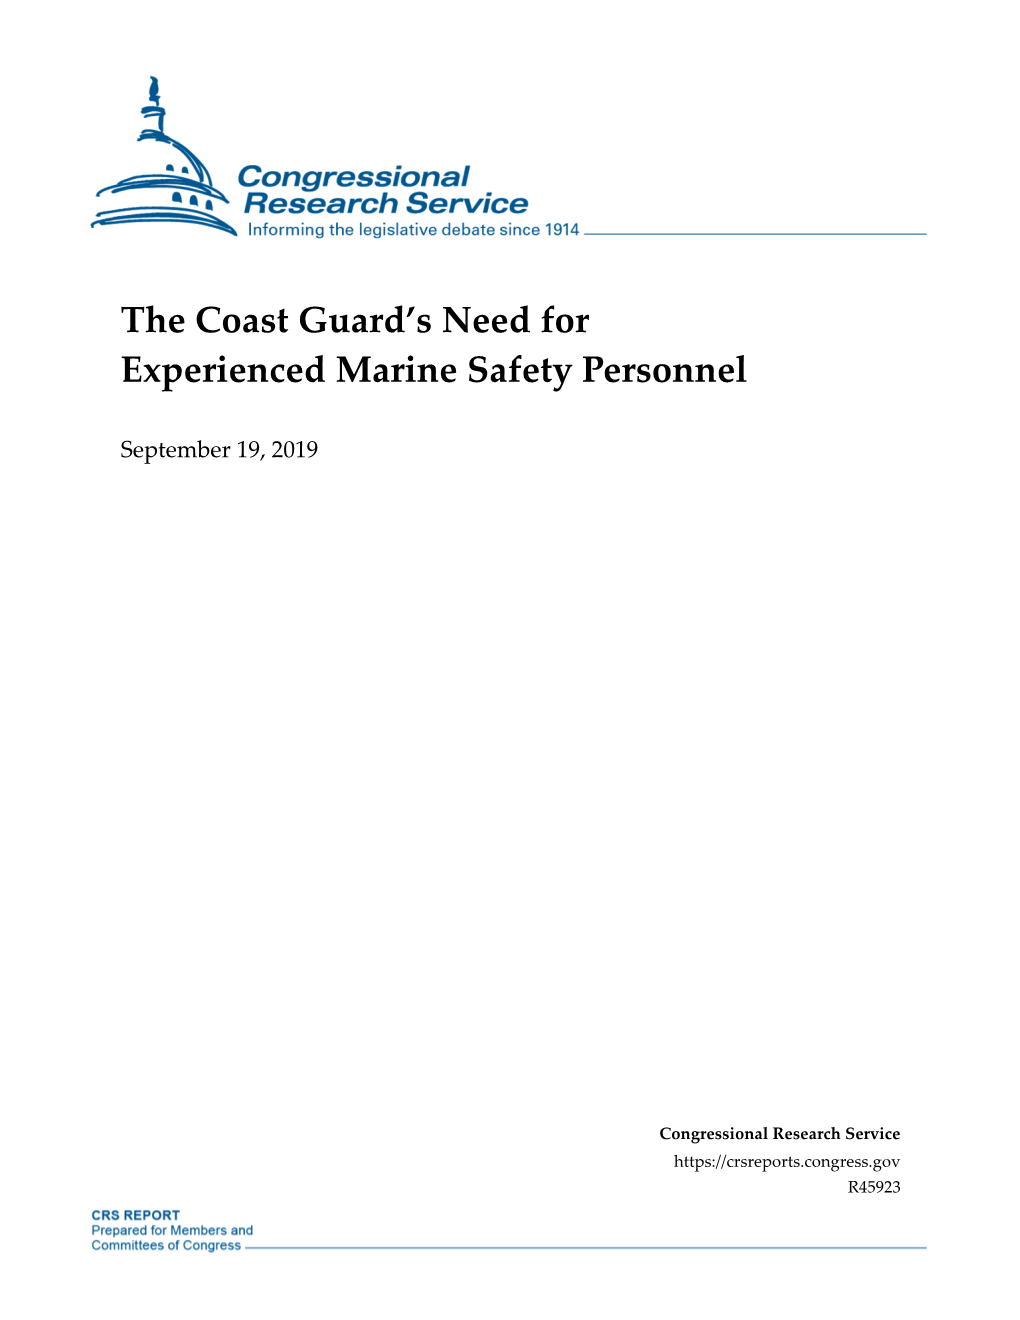 The Coast Guard's Need for Experienced Marine Safety Personnel